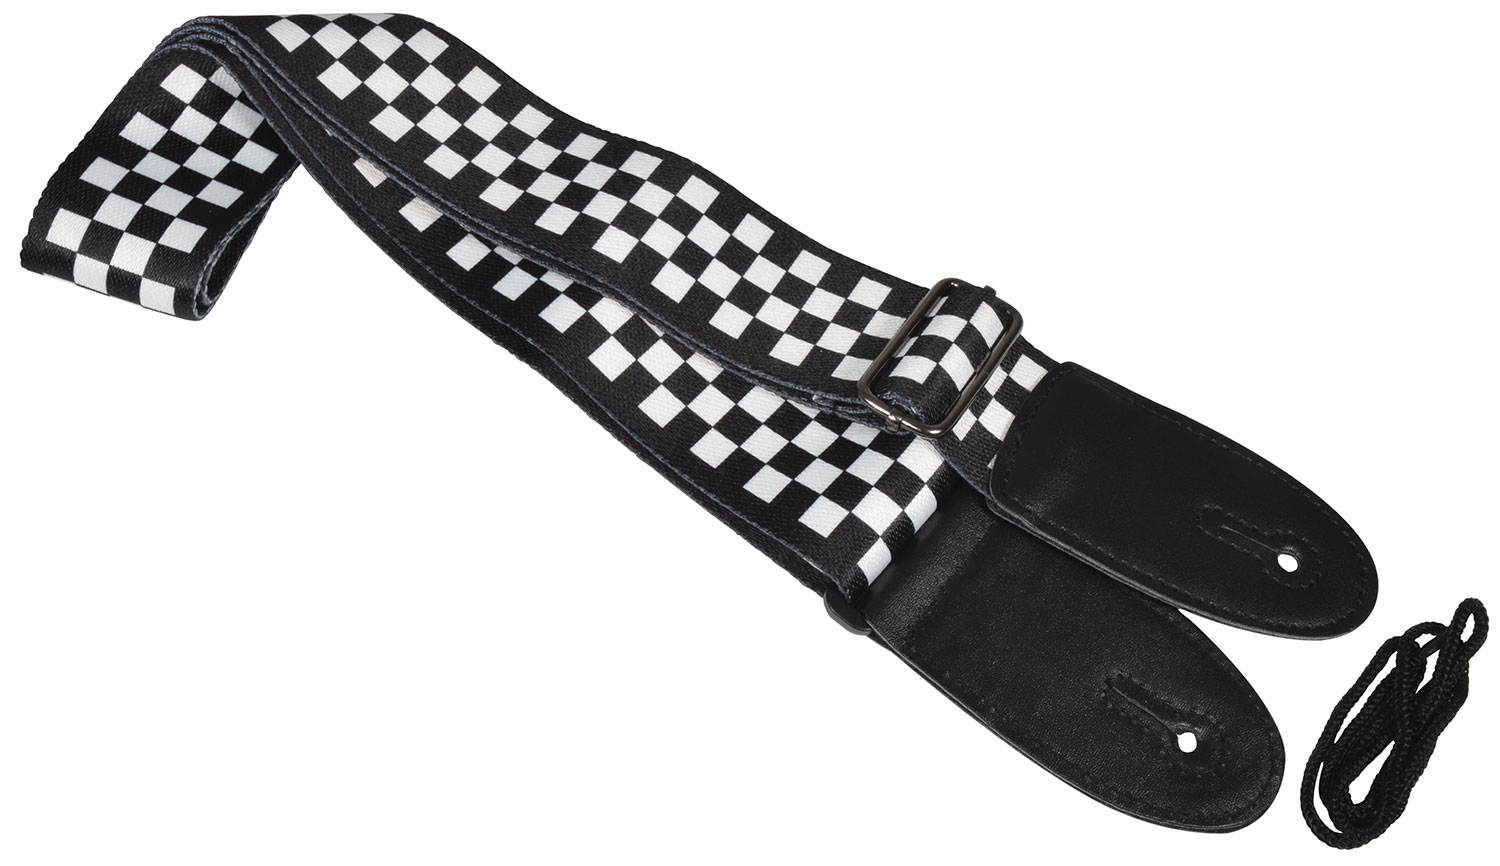 Deluxe Printed Design Guitar Straps Two-Tone Deluxe Guitar Strap